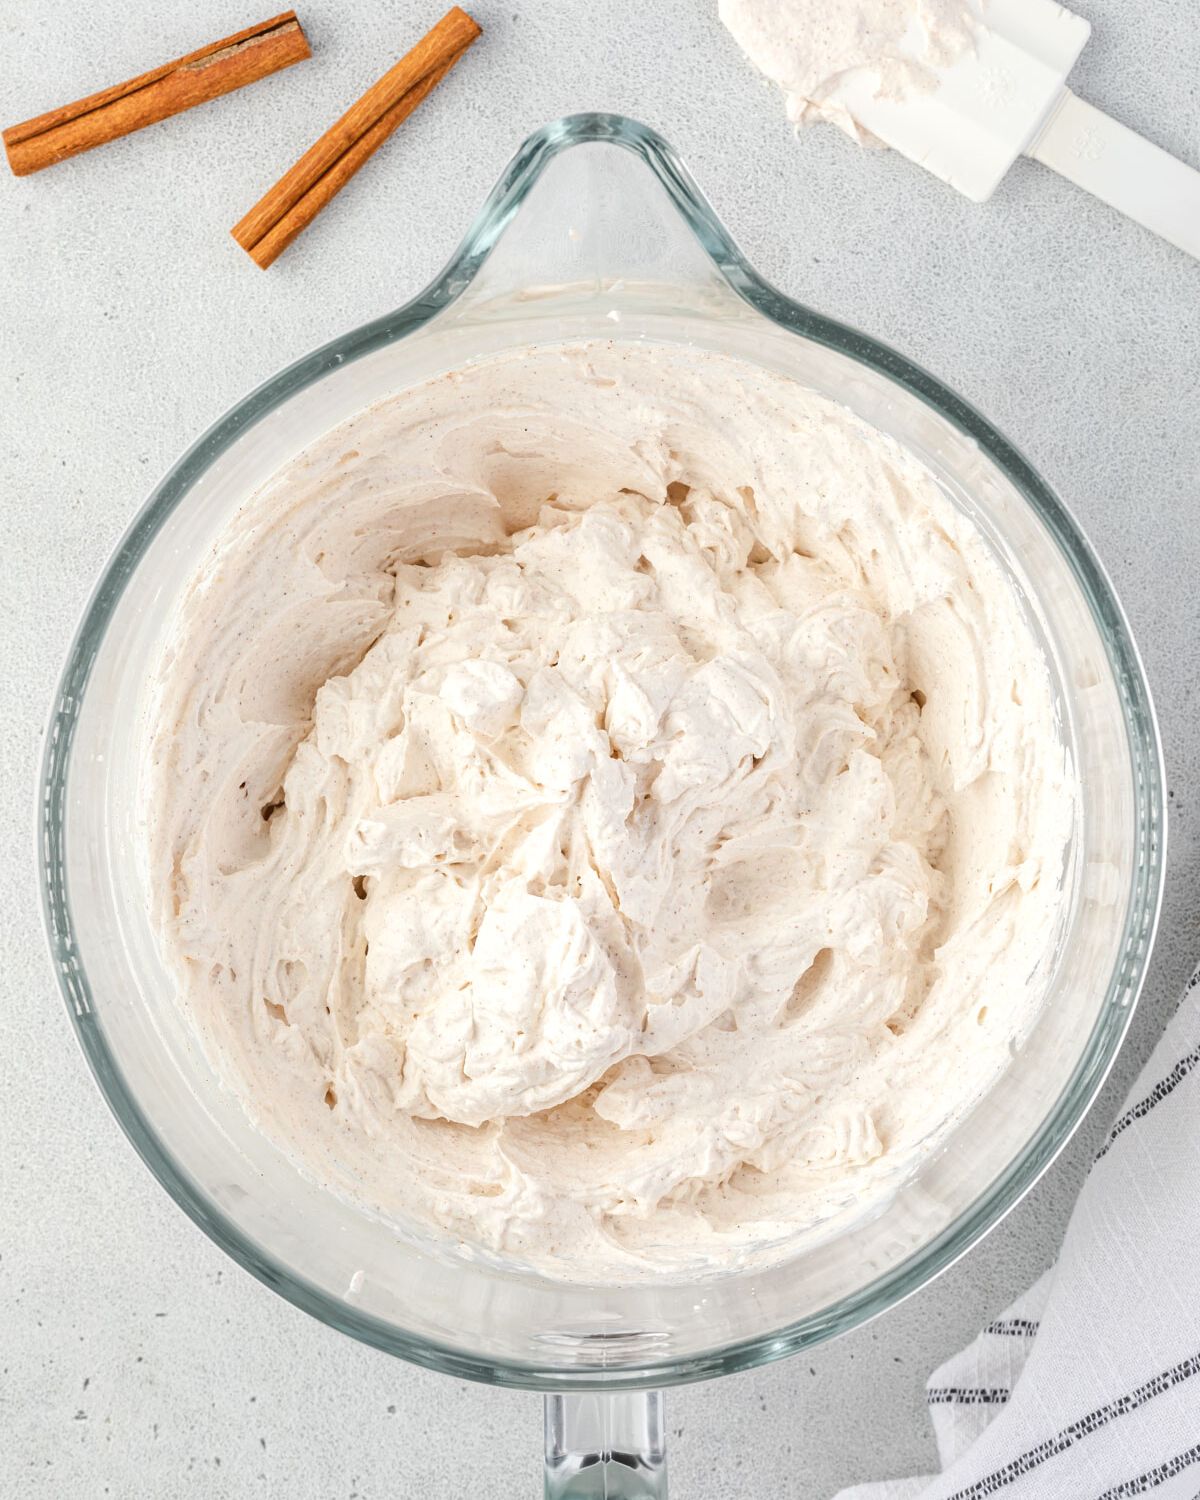 Cinnamon whipped cream beat to stiff peaks in large mixing bowl.